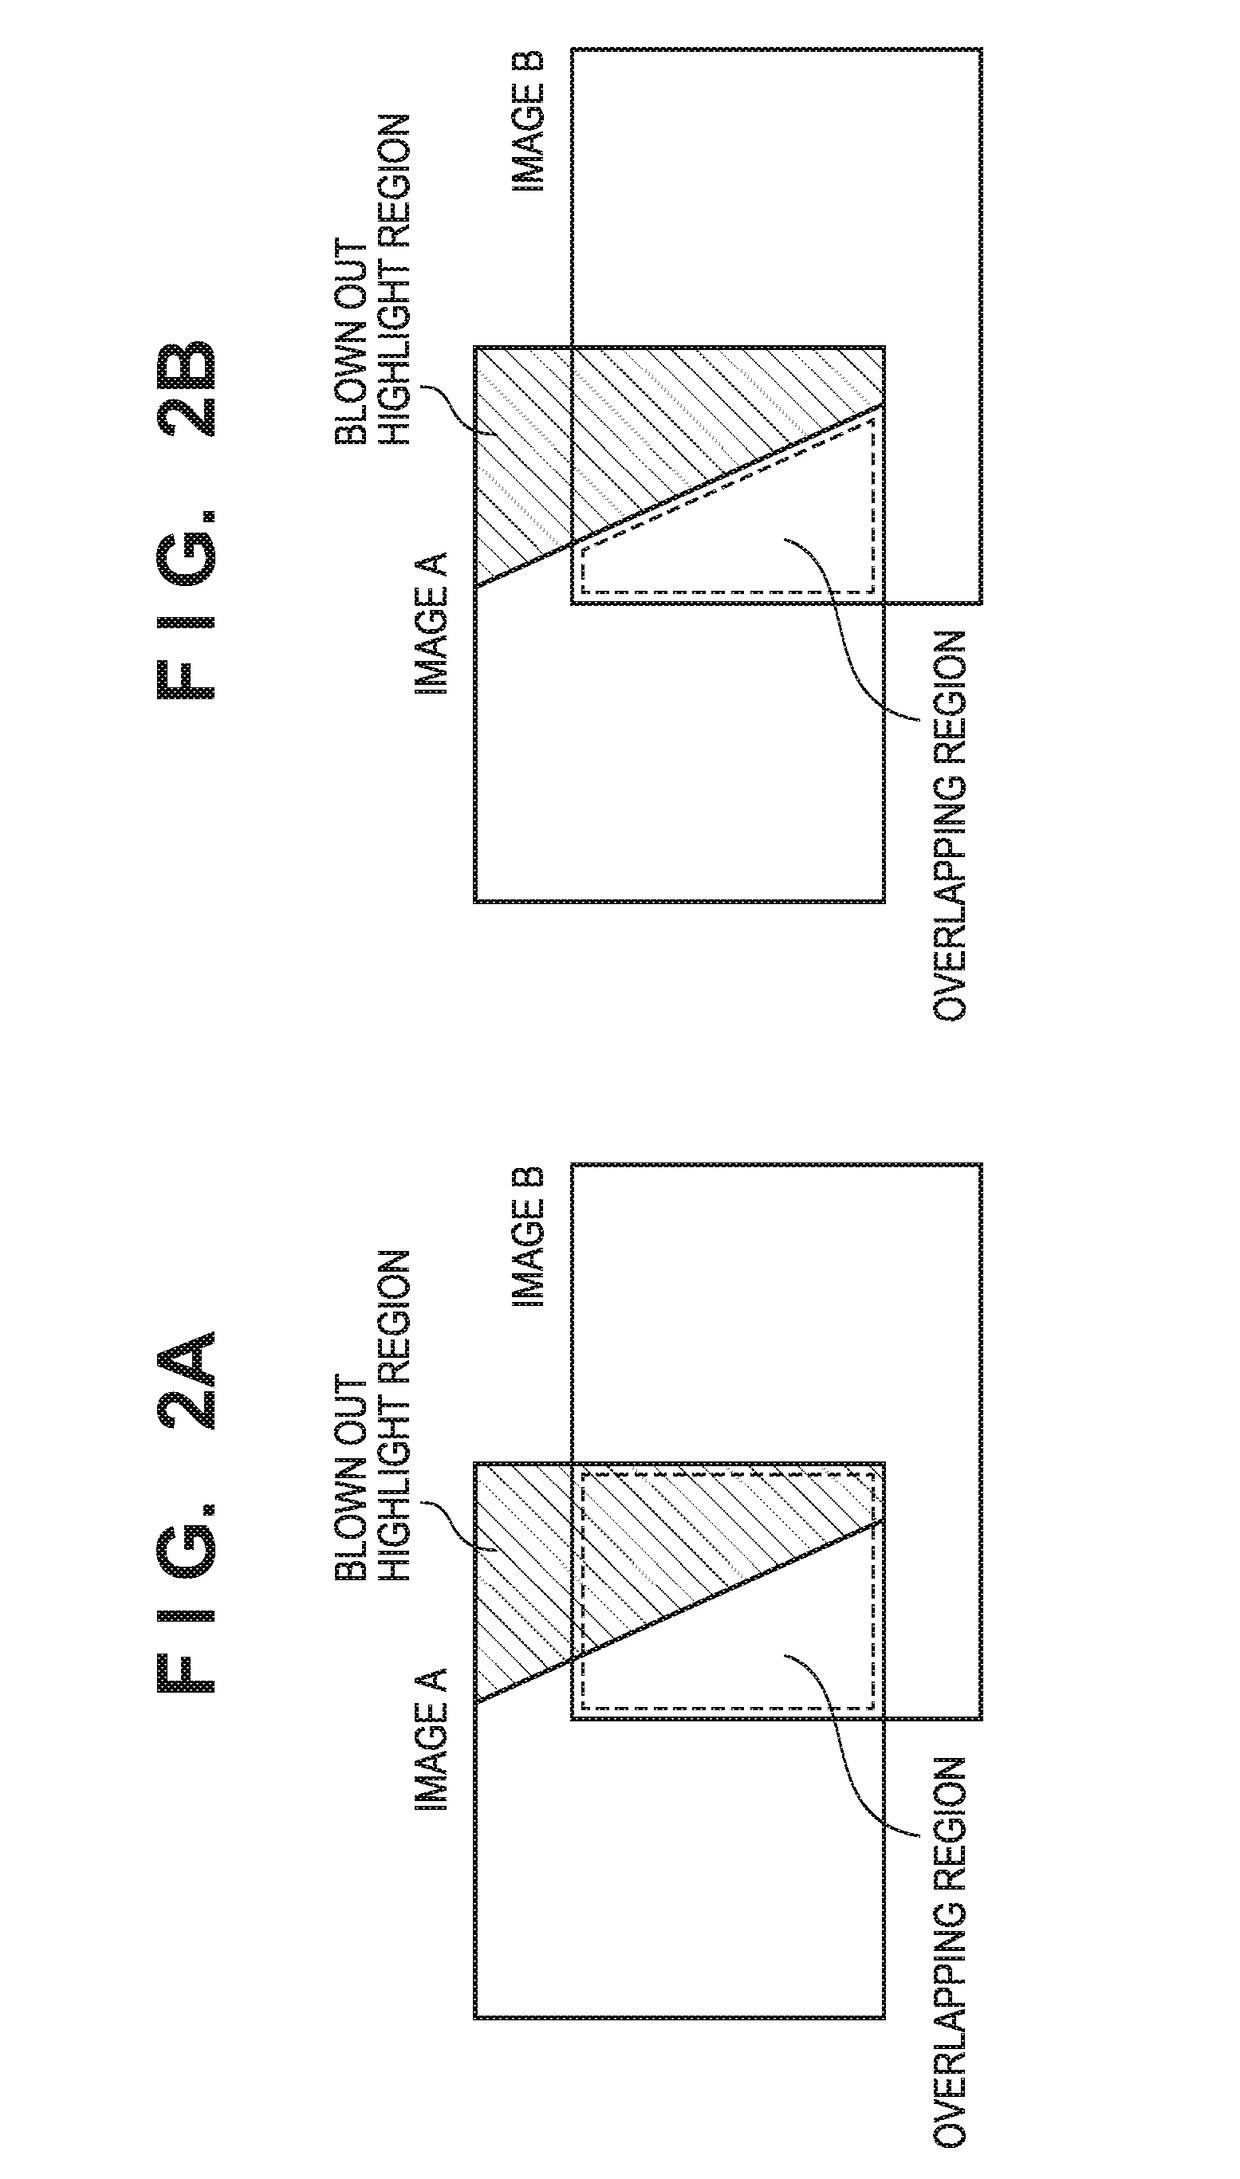 Image processing apparatus and method therefor